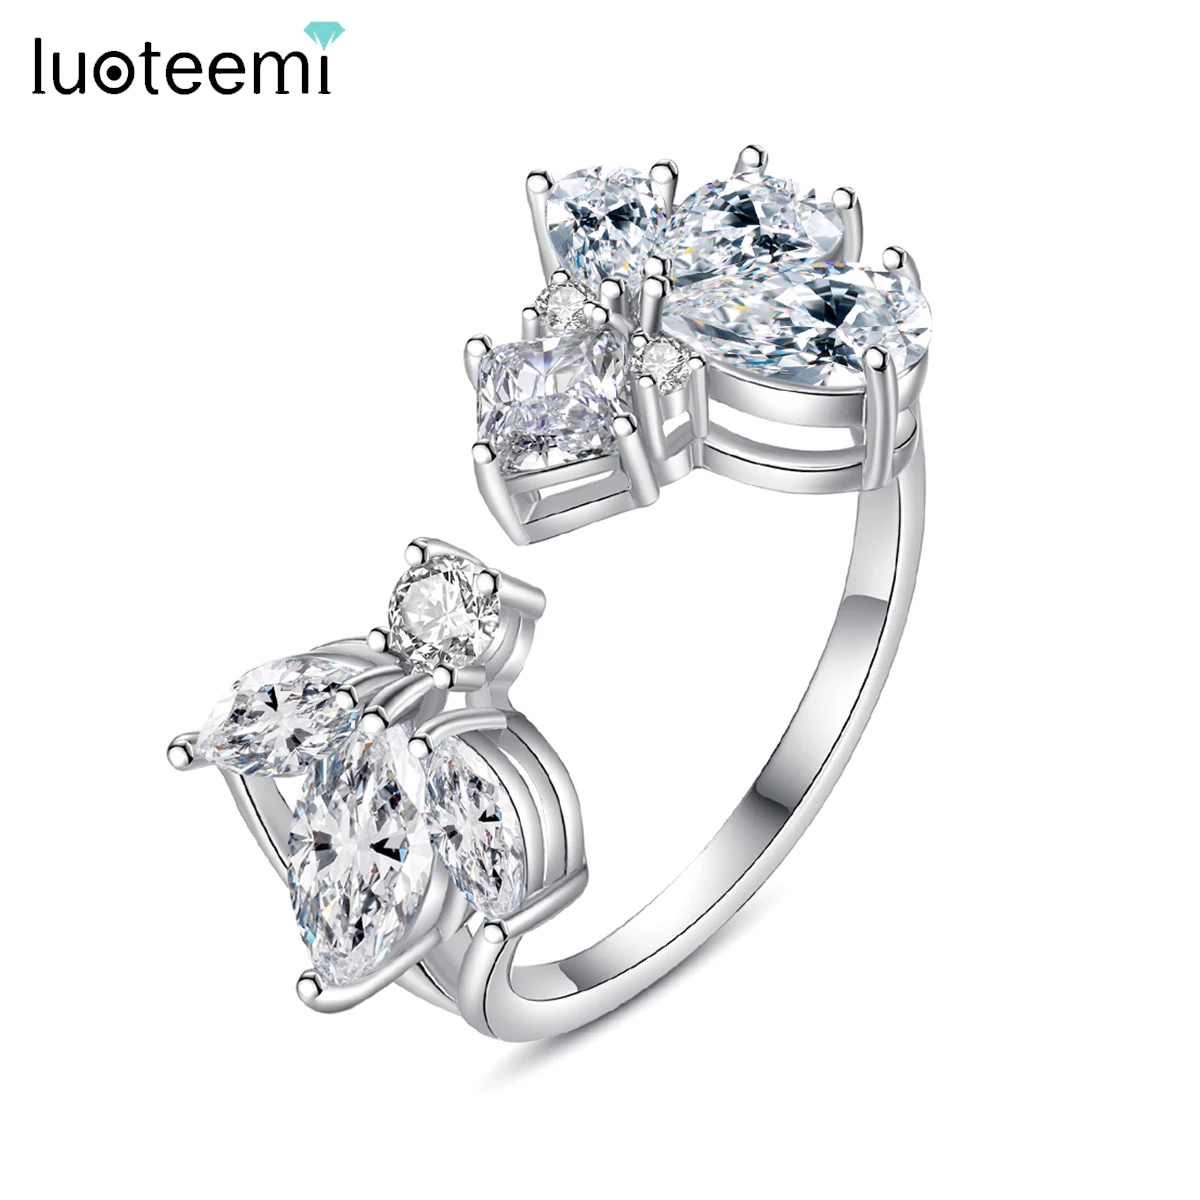 LUOTEEMI Unique Design Cubic Zirconia Finger Rings Adjustable Leaf Shape Clear CZ Jewelry for Bridal Wedding Party Accessories